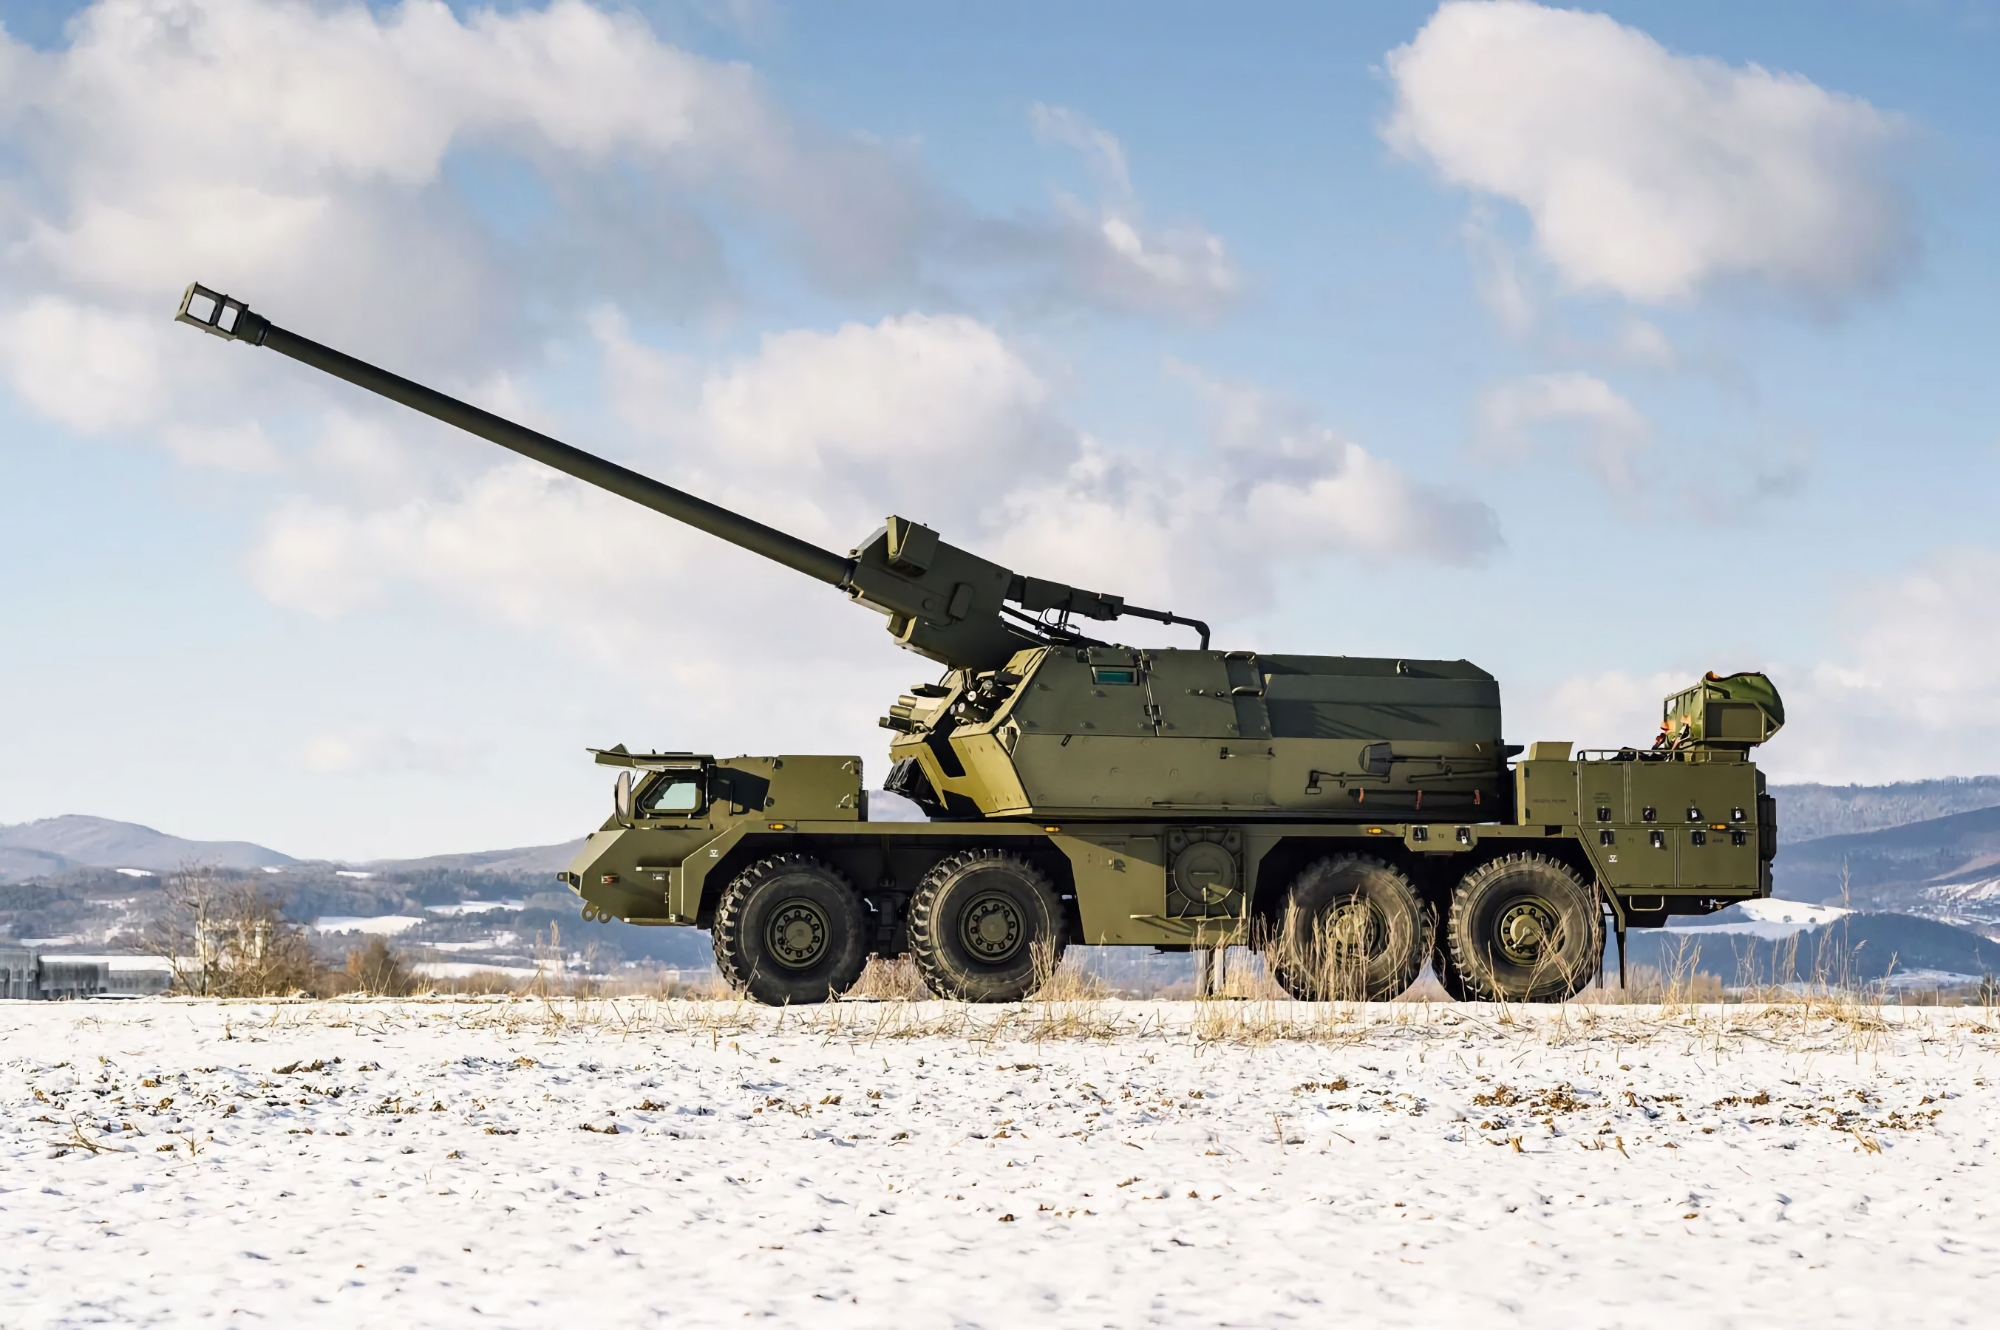 On 1 August, Slovakia will hand over to Ukraine two Zuzana 2 self-propelled artillery units, which were bought for the AFU by Denmark, Norway and Germany